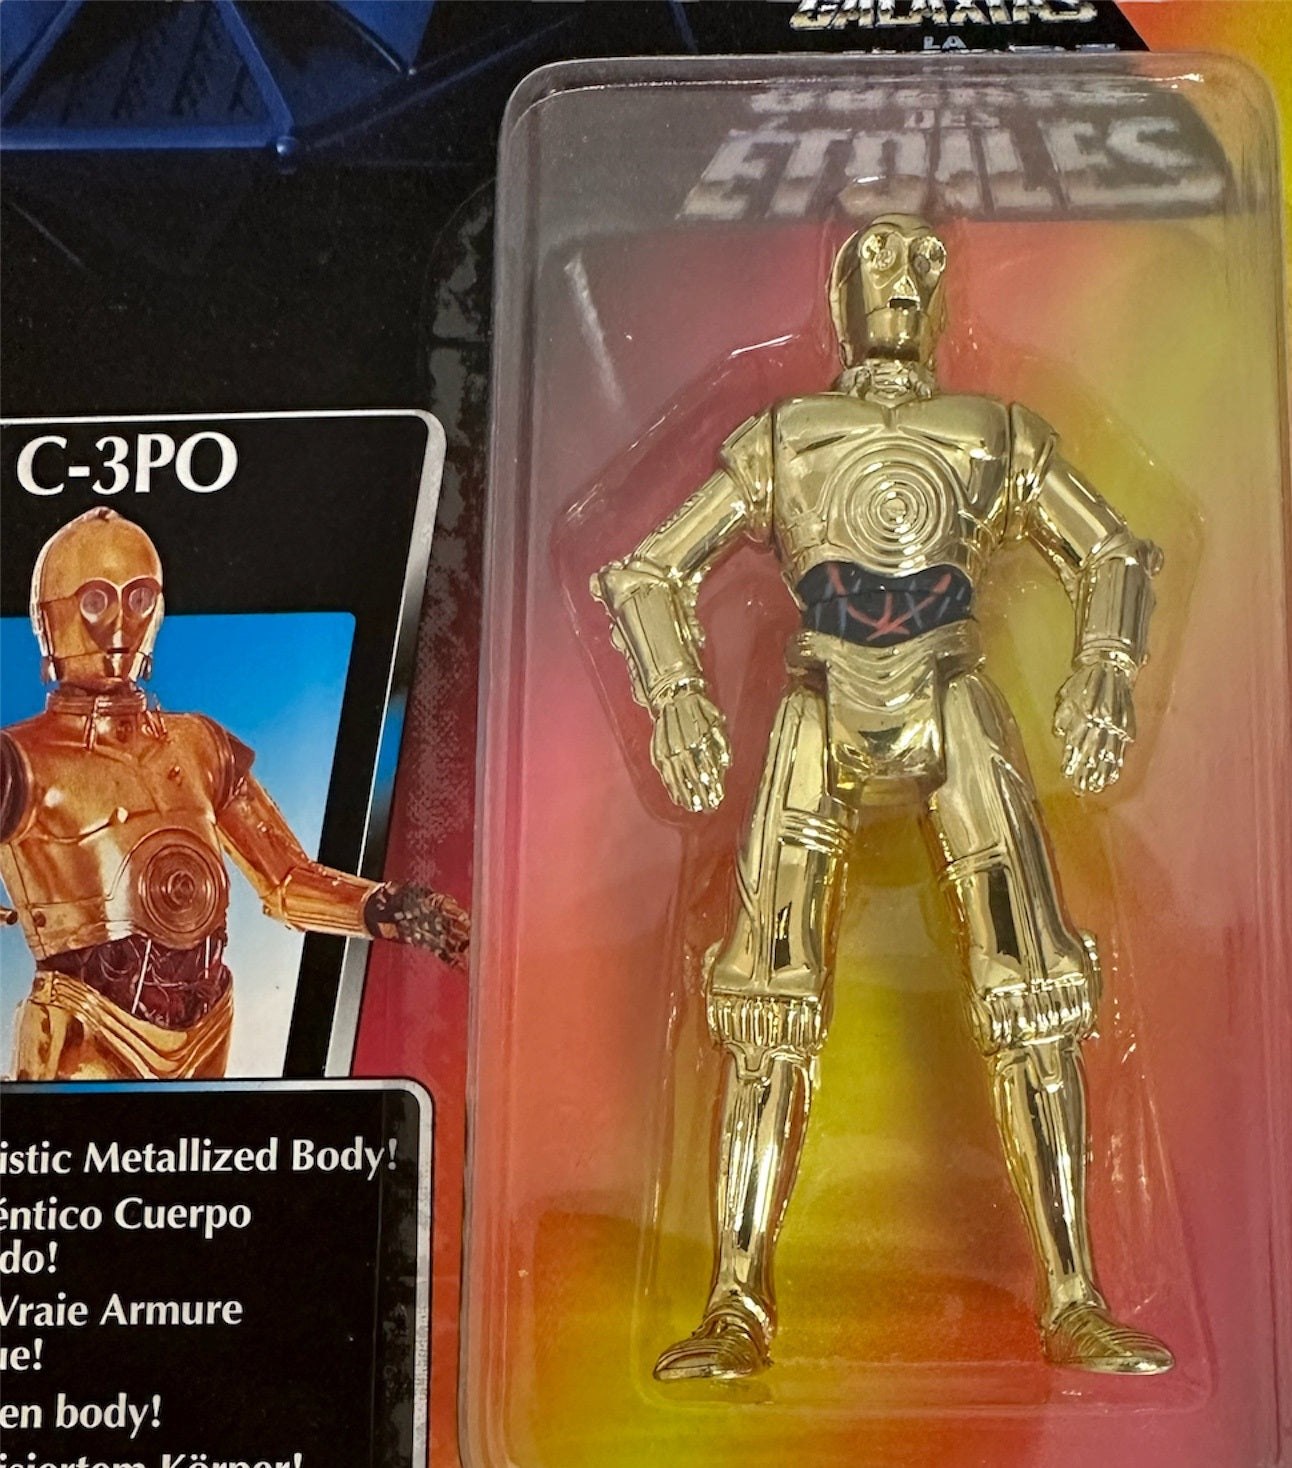 Vintage 1995 Star Wars The Power Of The Force Red Card C-3PO Action Figure - Brand New Factory Sealed Shop Stock Room Find